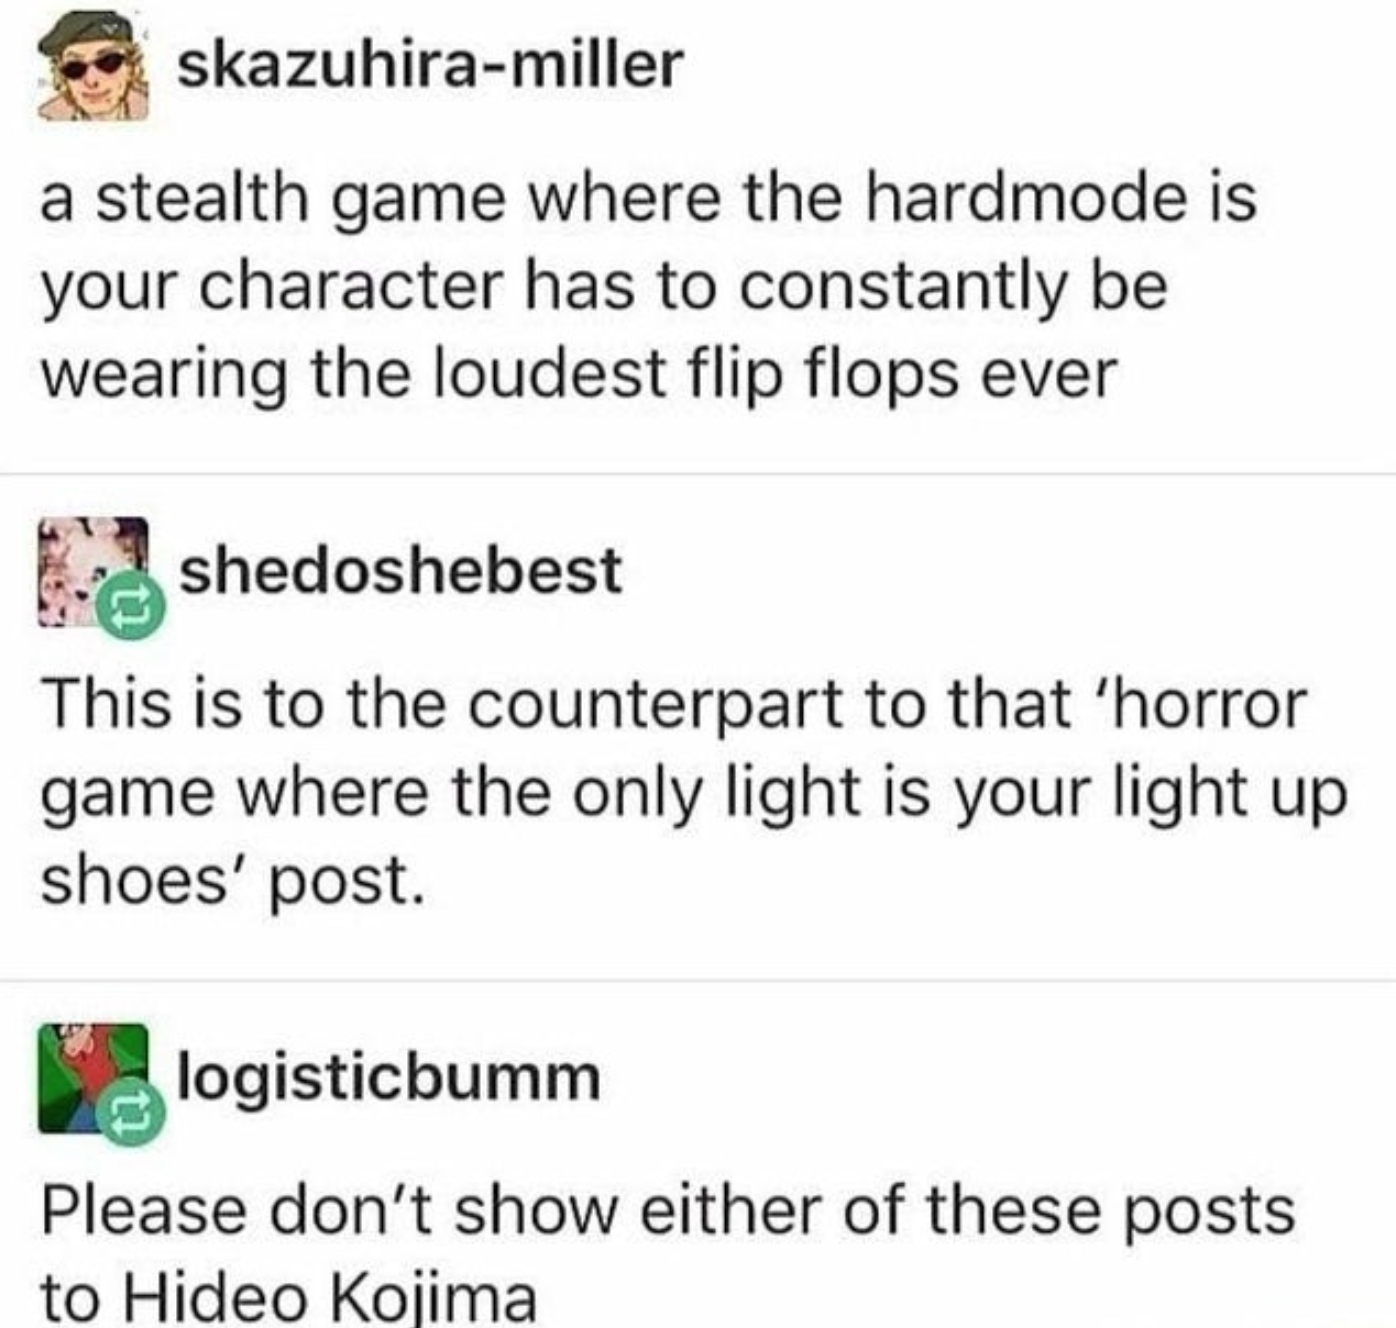 paper - skazuhiramiller a stealth game where the hardmode is your character has to constantly be wearing the loudest flip flops ever shedoshebest This is to the counterpart to that 'horror game where the only light is your light up shoes' post. logisticbu